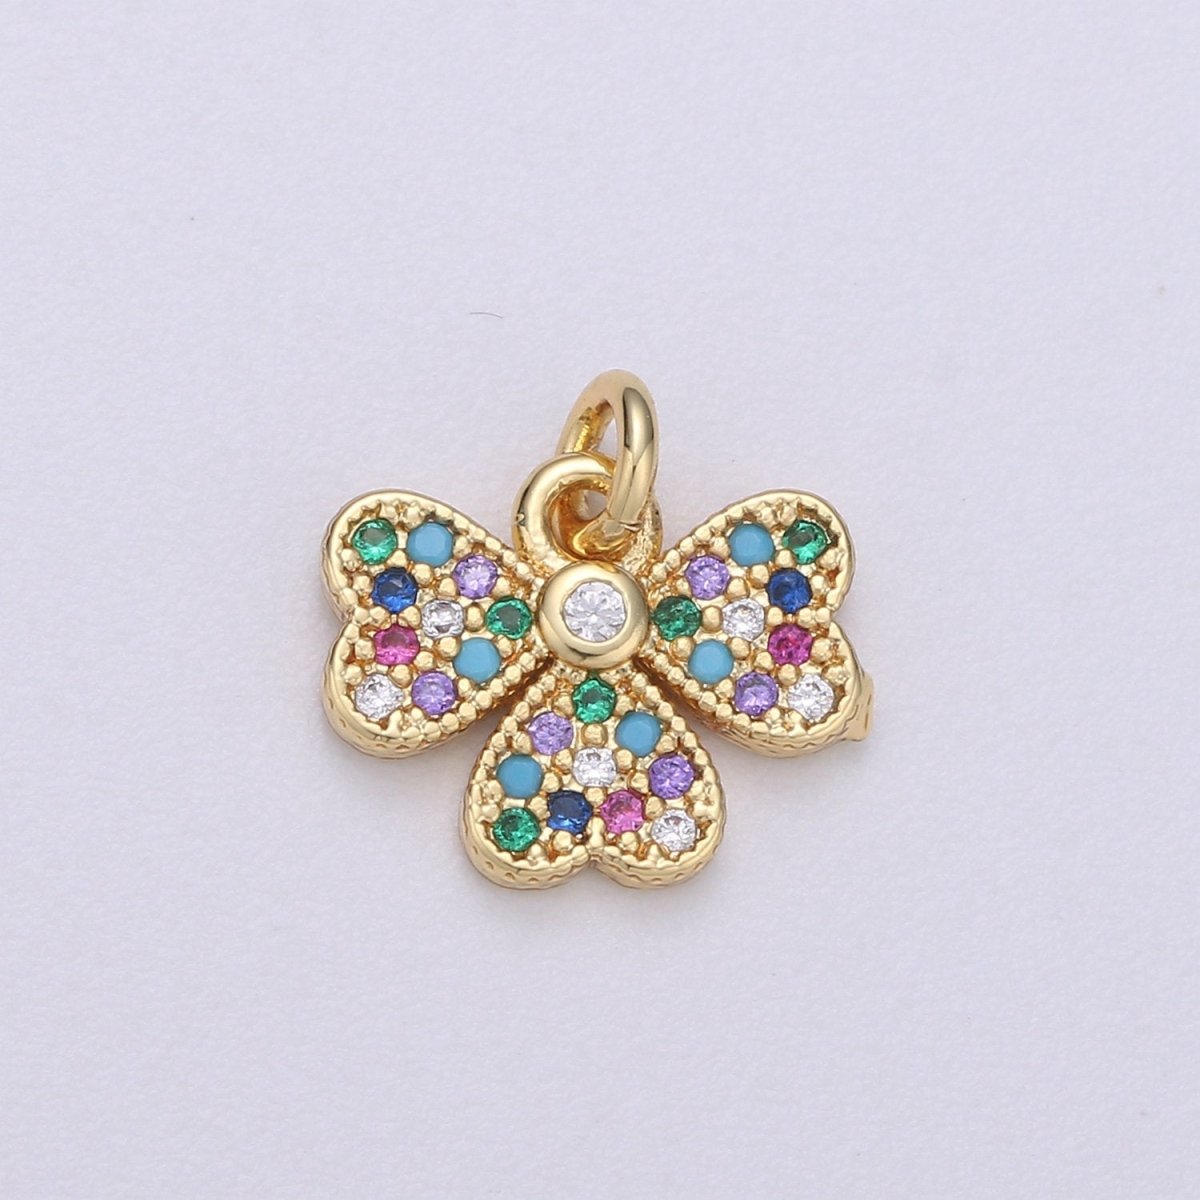 14k Gold Filled Bow Charm Micro Pave Ribbon Charm, Rainbow Cubic Charms, CZ Gold Colorful Charm, Dainty Minimalist Jewelry SupplyC-463 - DLUXCA